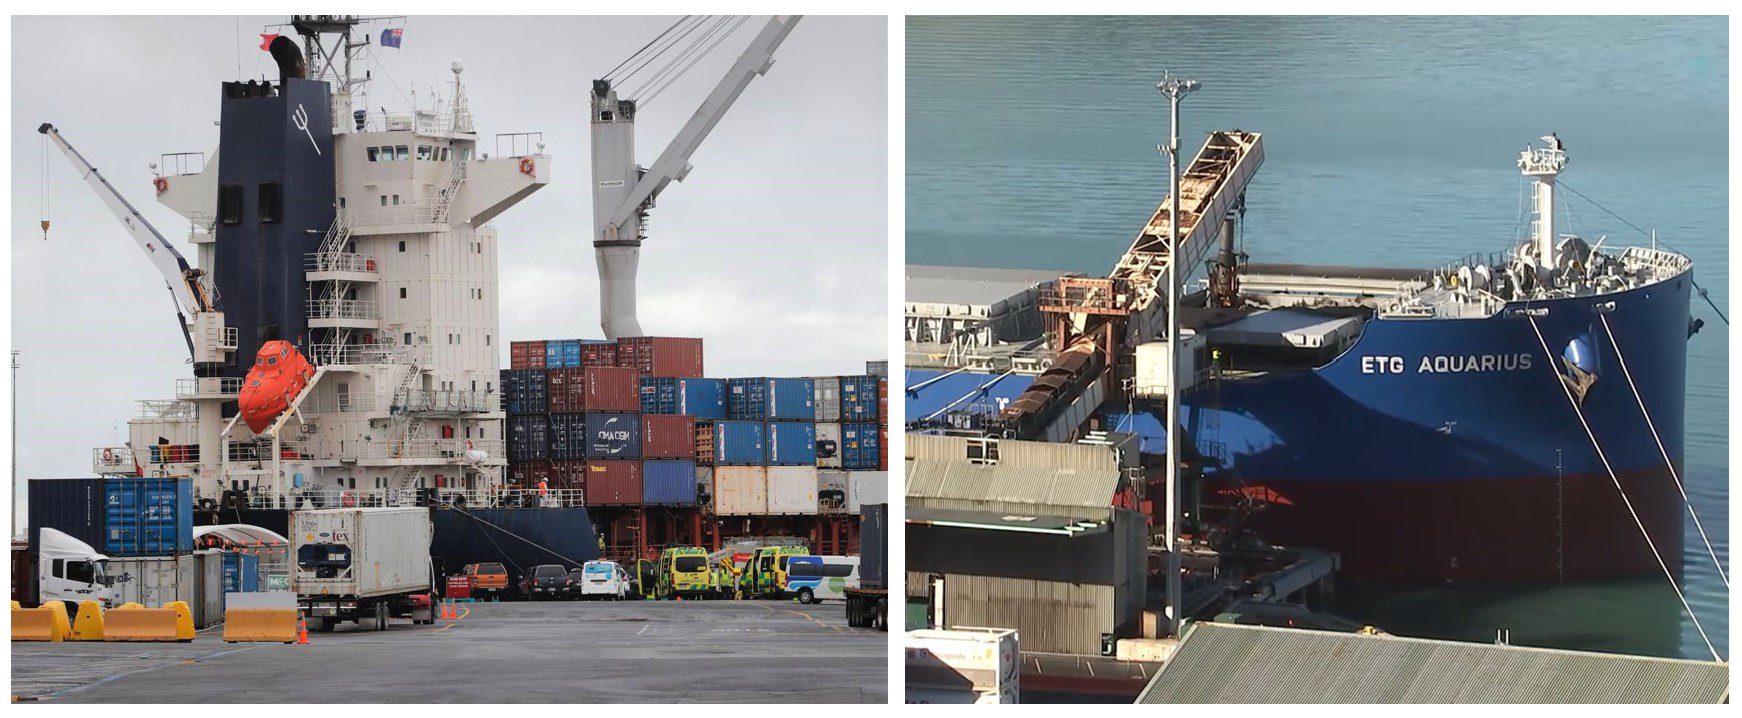 Views of the two ships on which the stevedores were working; container ship Capitaine Tasman (left) and bulk carrier ETG Aquarius (right). Photo courtesy Transport Accident Investigation Commission